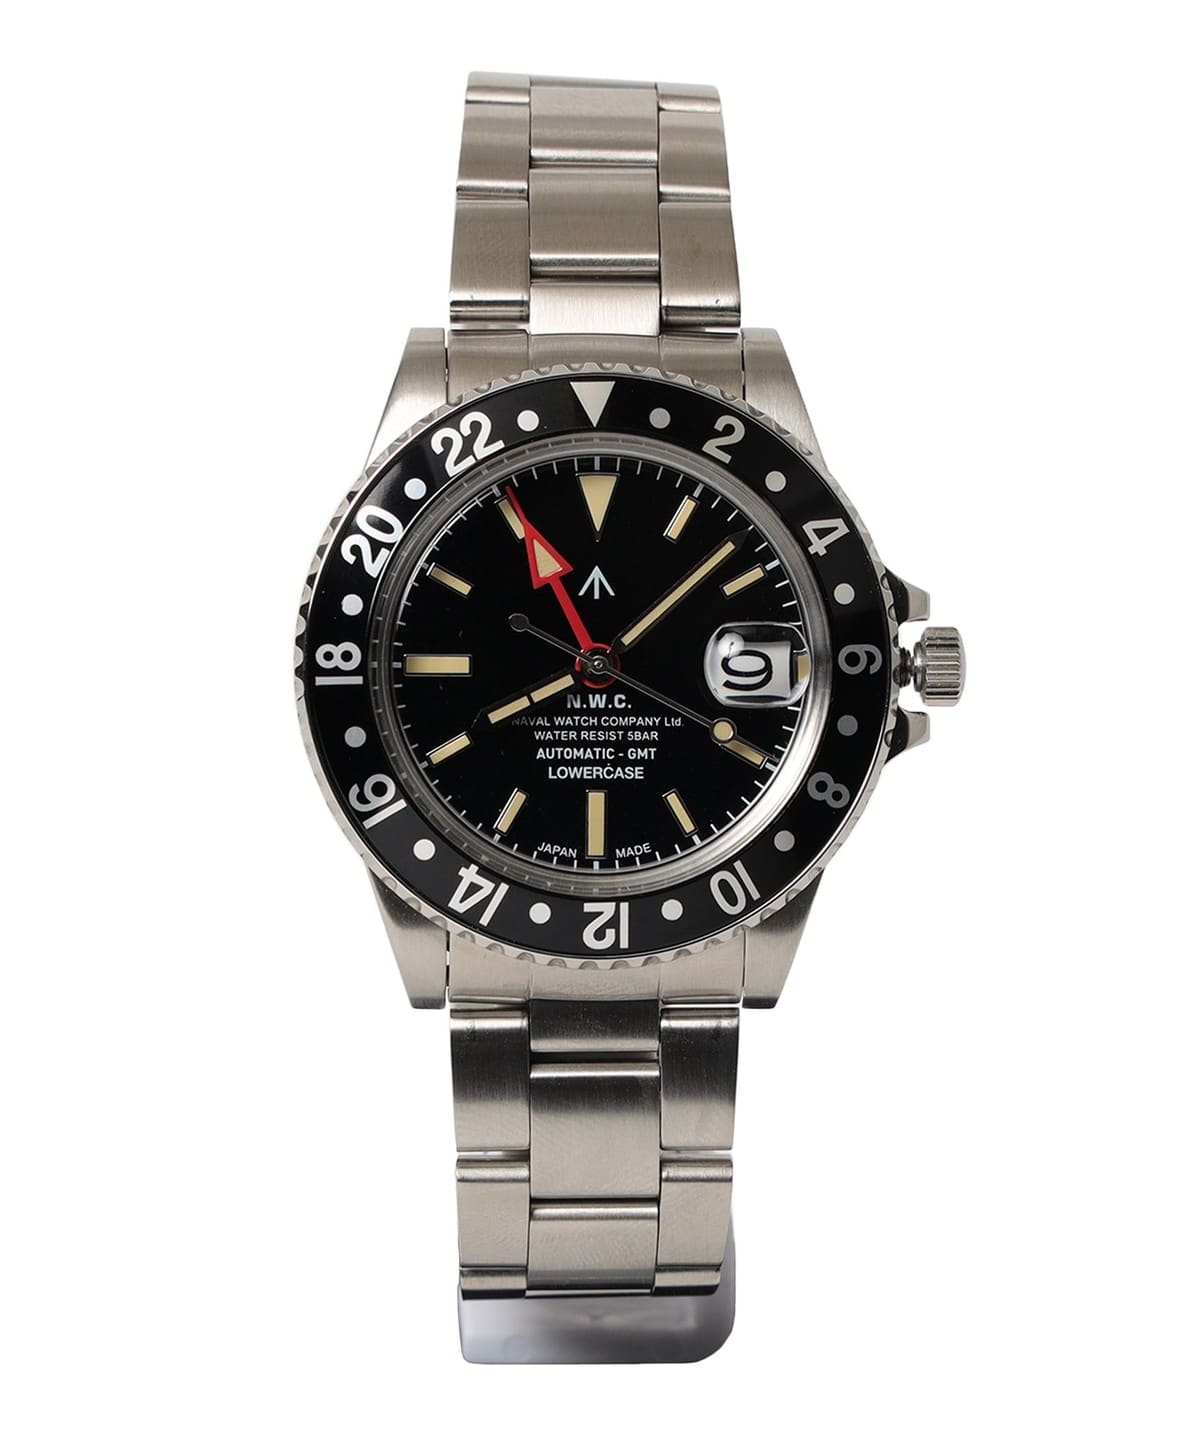 NAVAL WATCH Produced by LOWERCASE / FRXD GMT EXCLUSIVE-